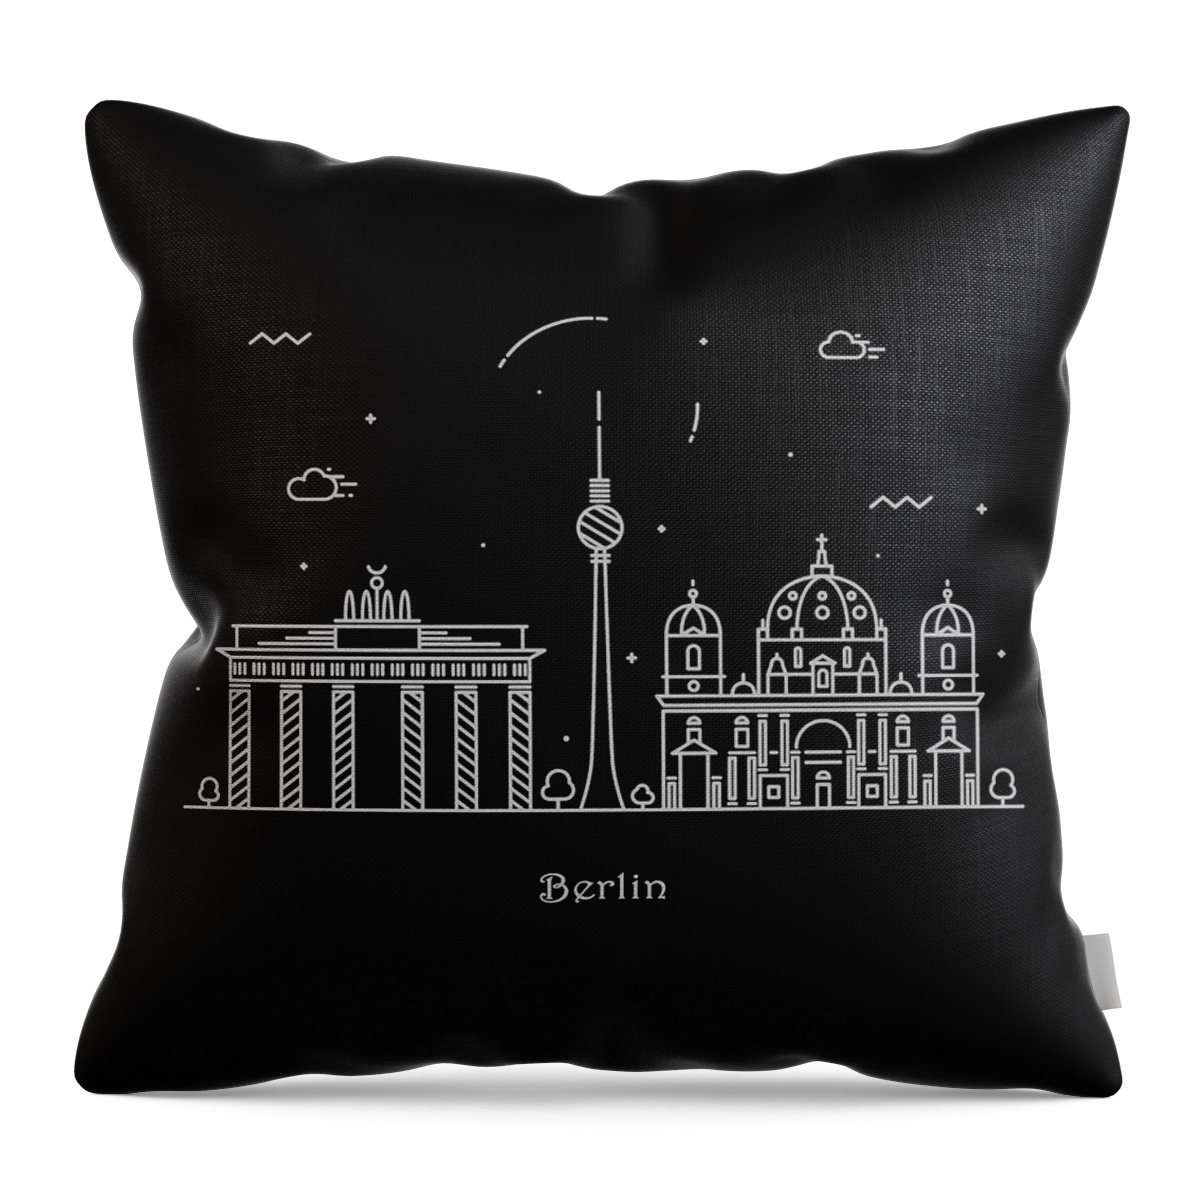 Berlin Throw Pillow featuring the drawing Berlin Skyline Travel Poster by Inspirowl Design